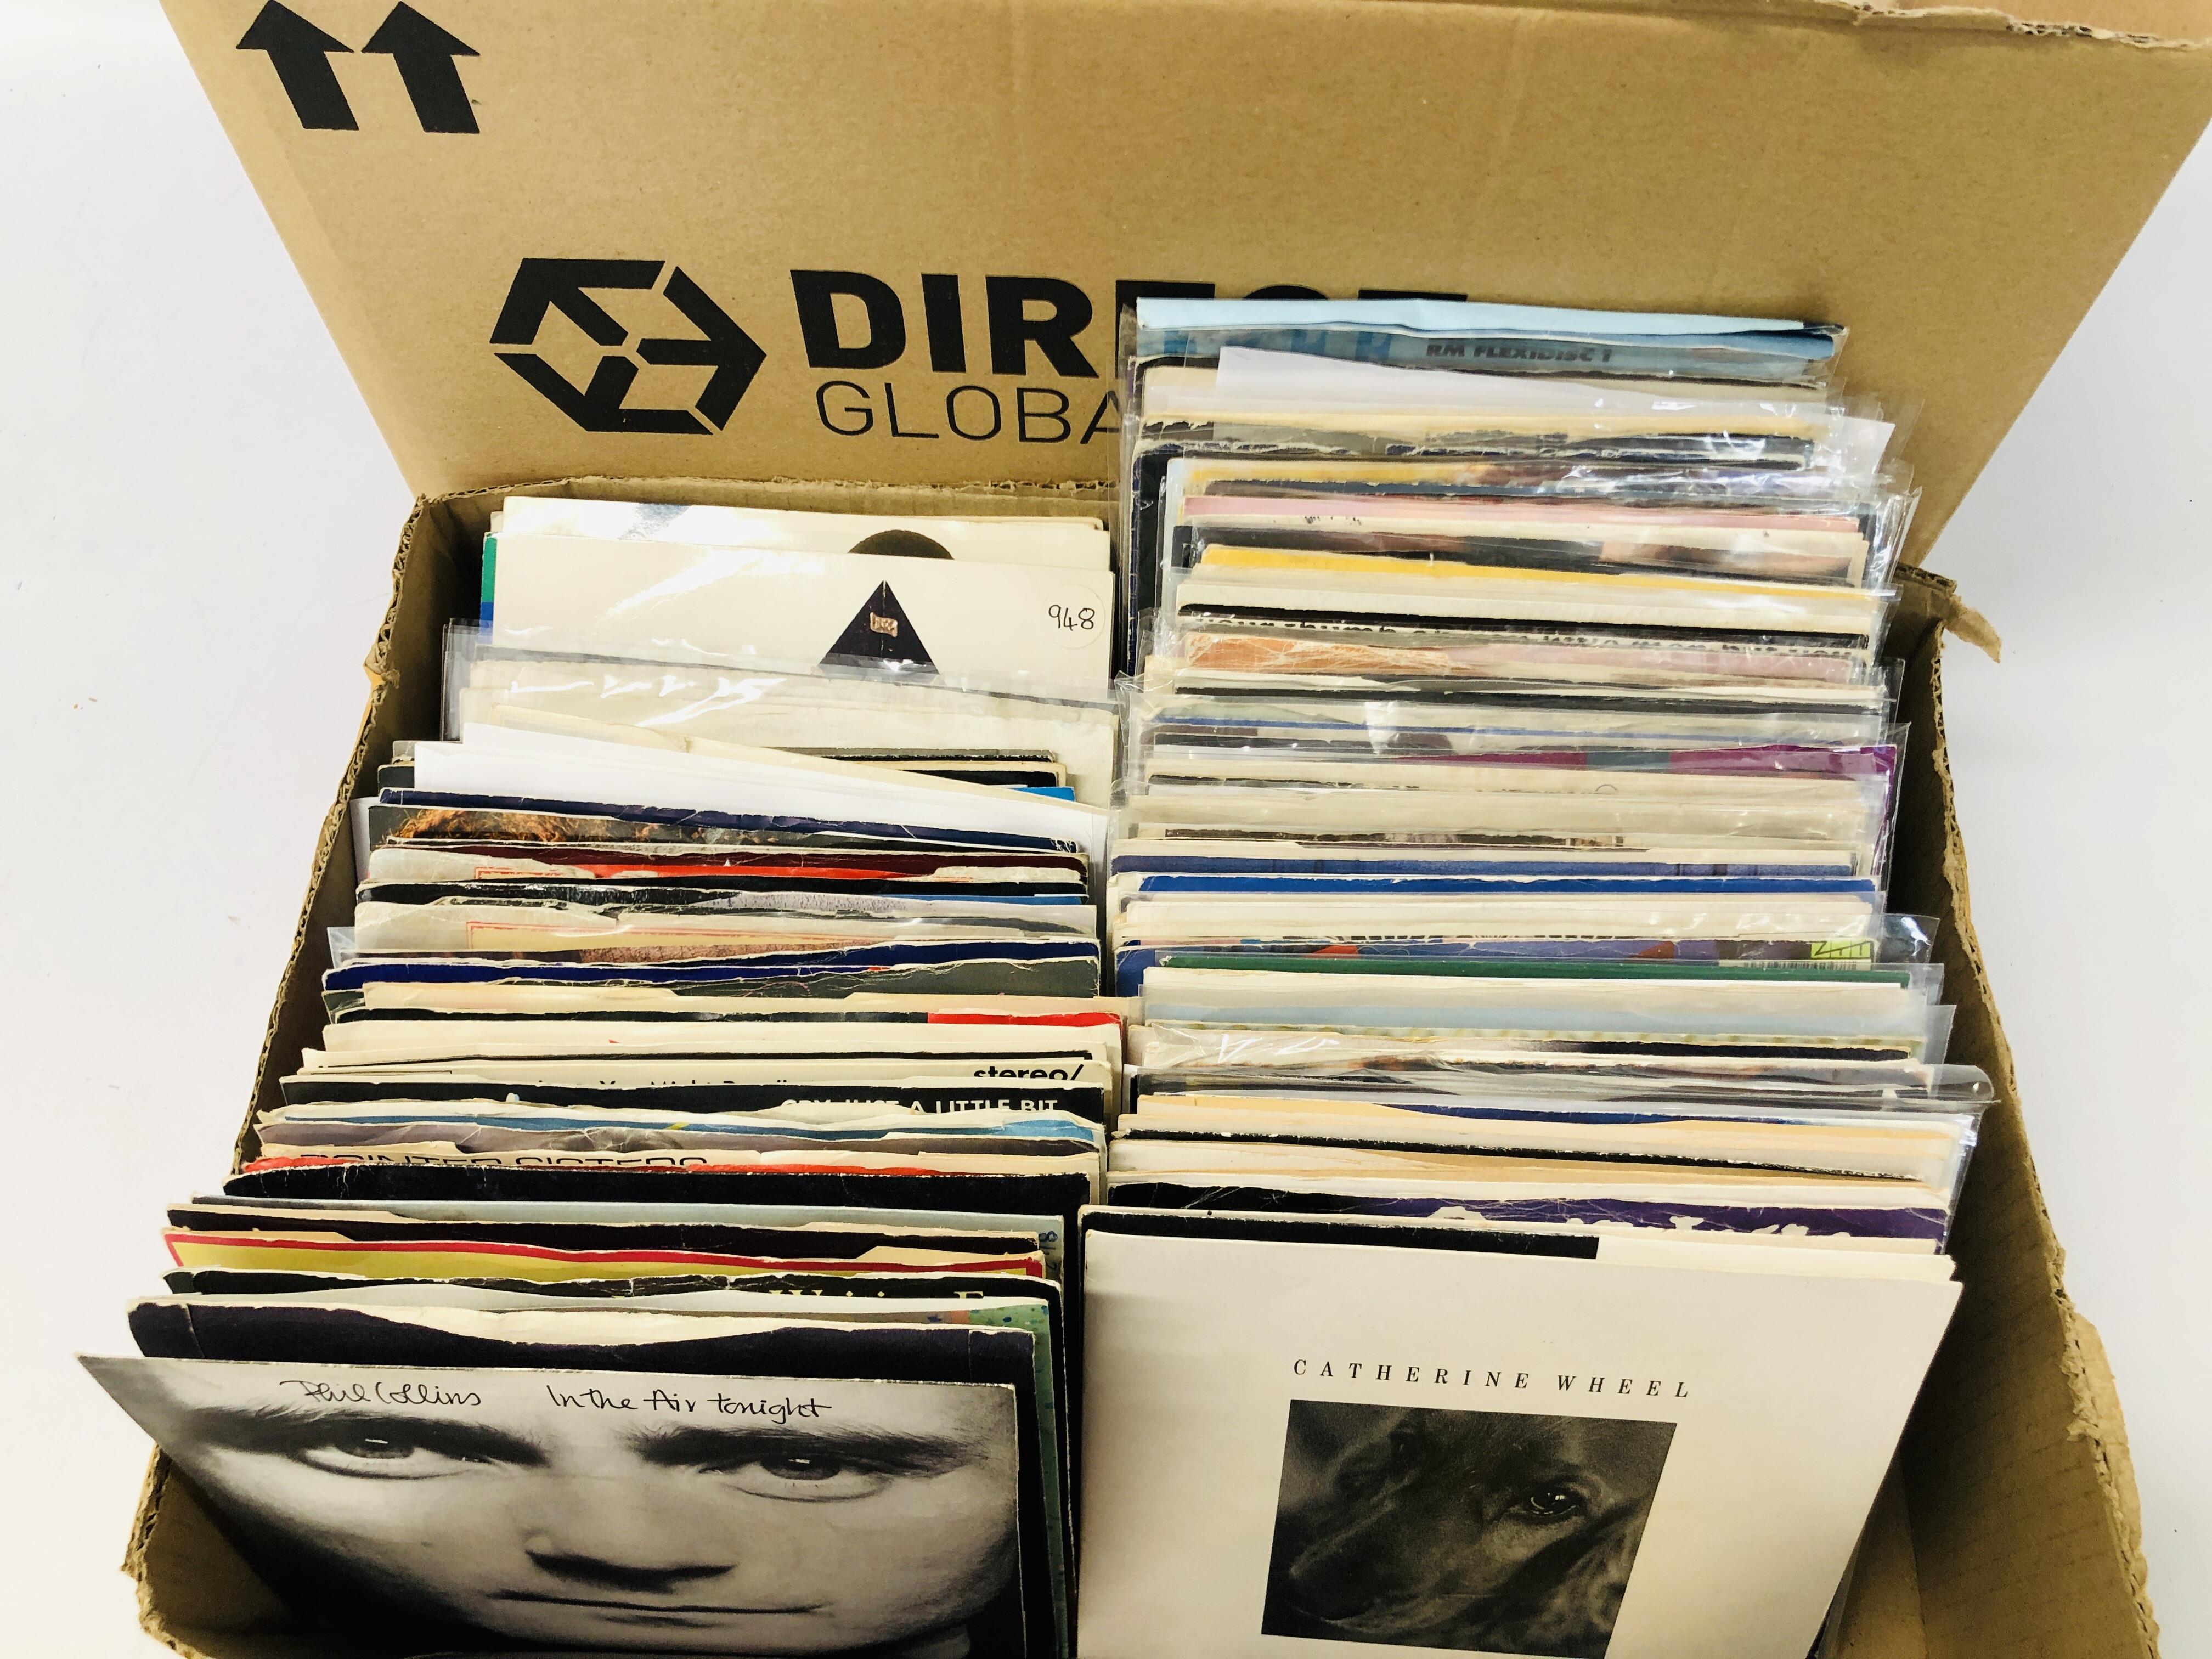 2 BOXES CONTAINING A QUANTITY OF 45 RPM SINGLES TO INCLUDE INXS, CATHERINE WHEEL, PHIL COLLINS, - Image 5 of 10